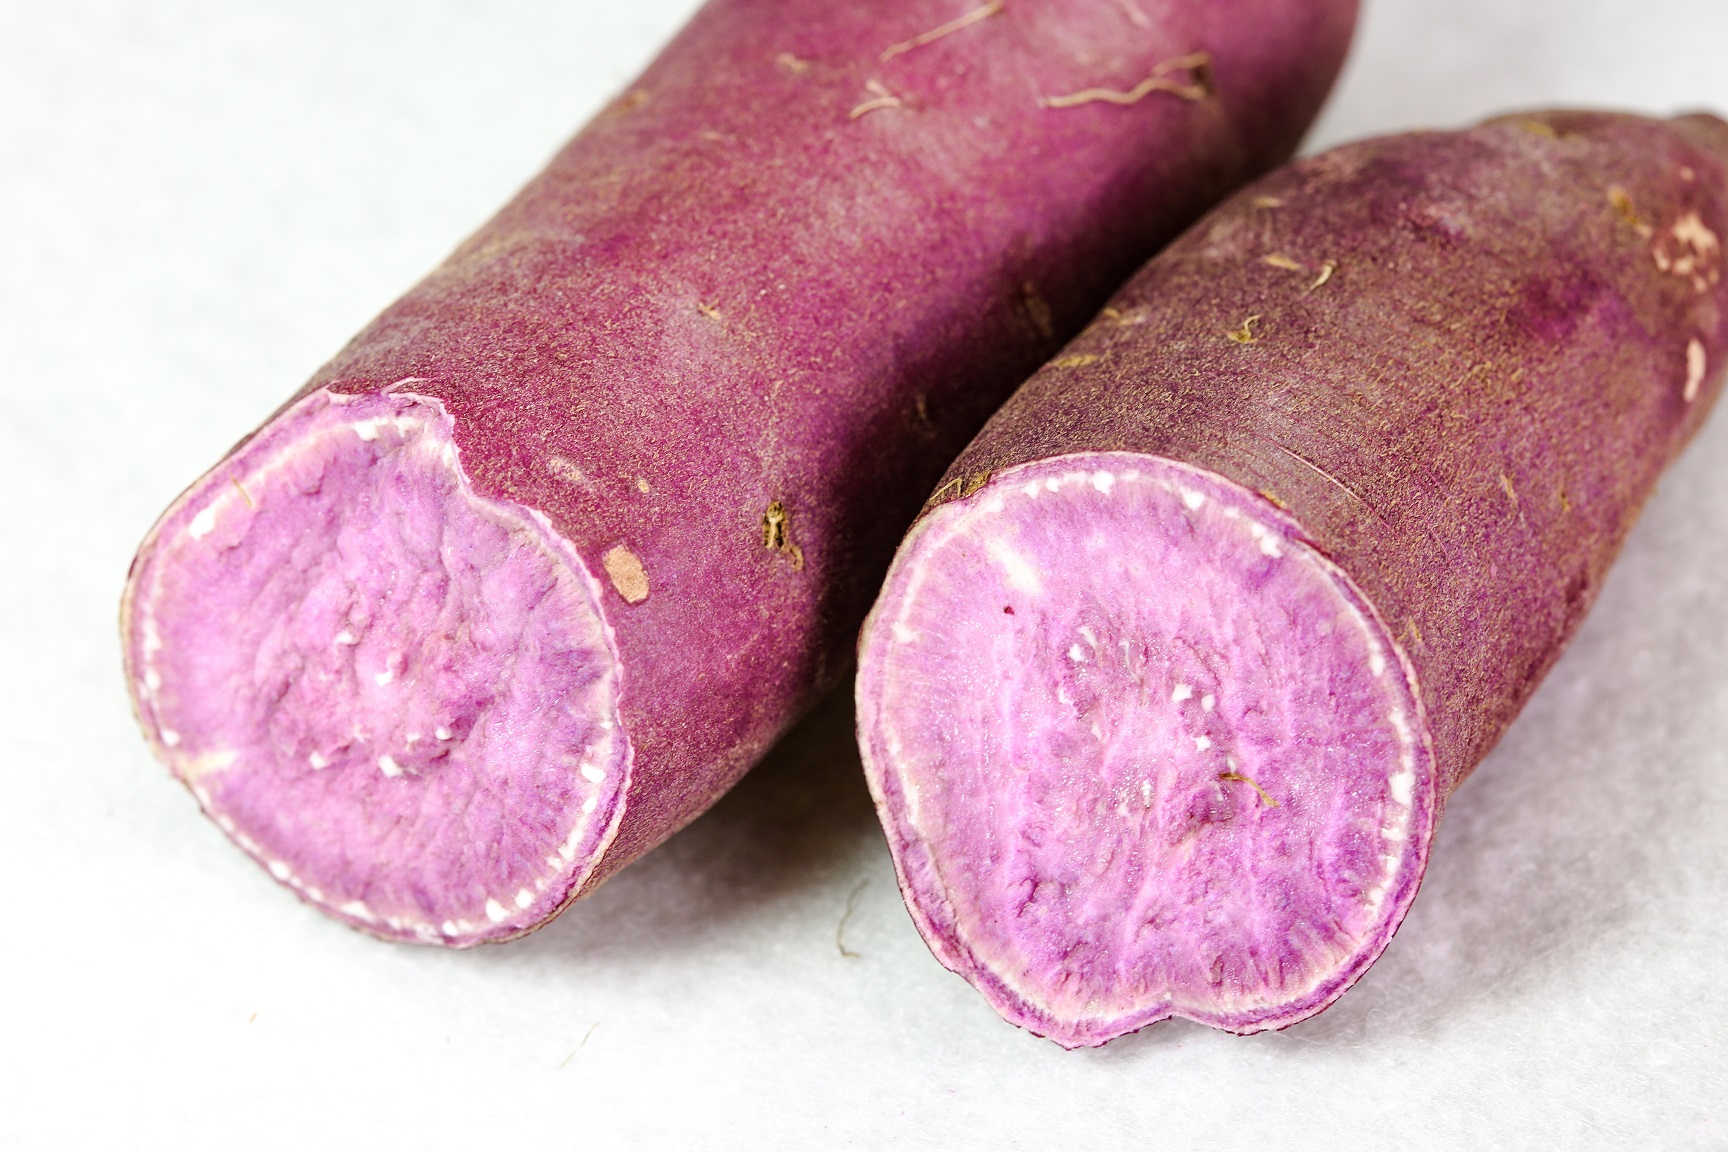 Purple yam (ube halaya) is used to flavour many of the Valencia’s baked treats. Photo: Getty Images